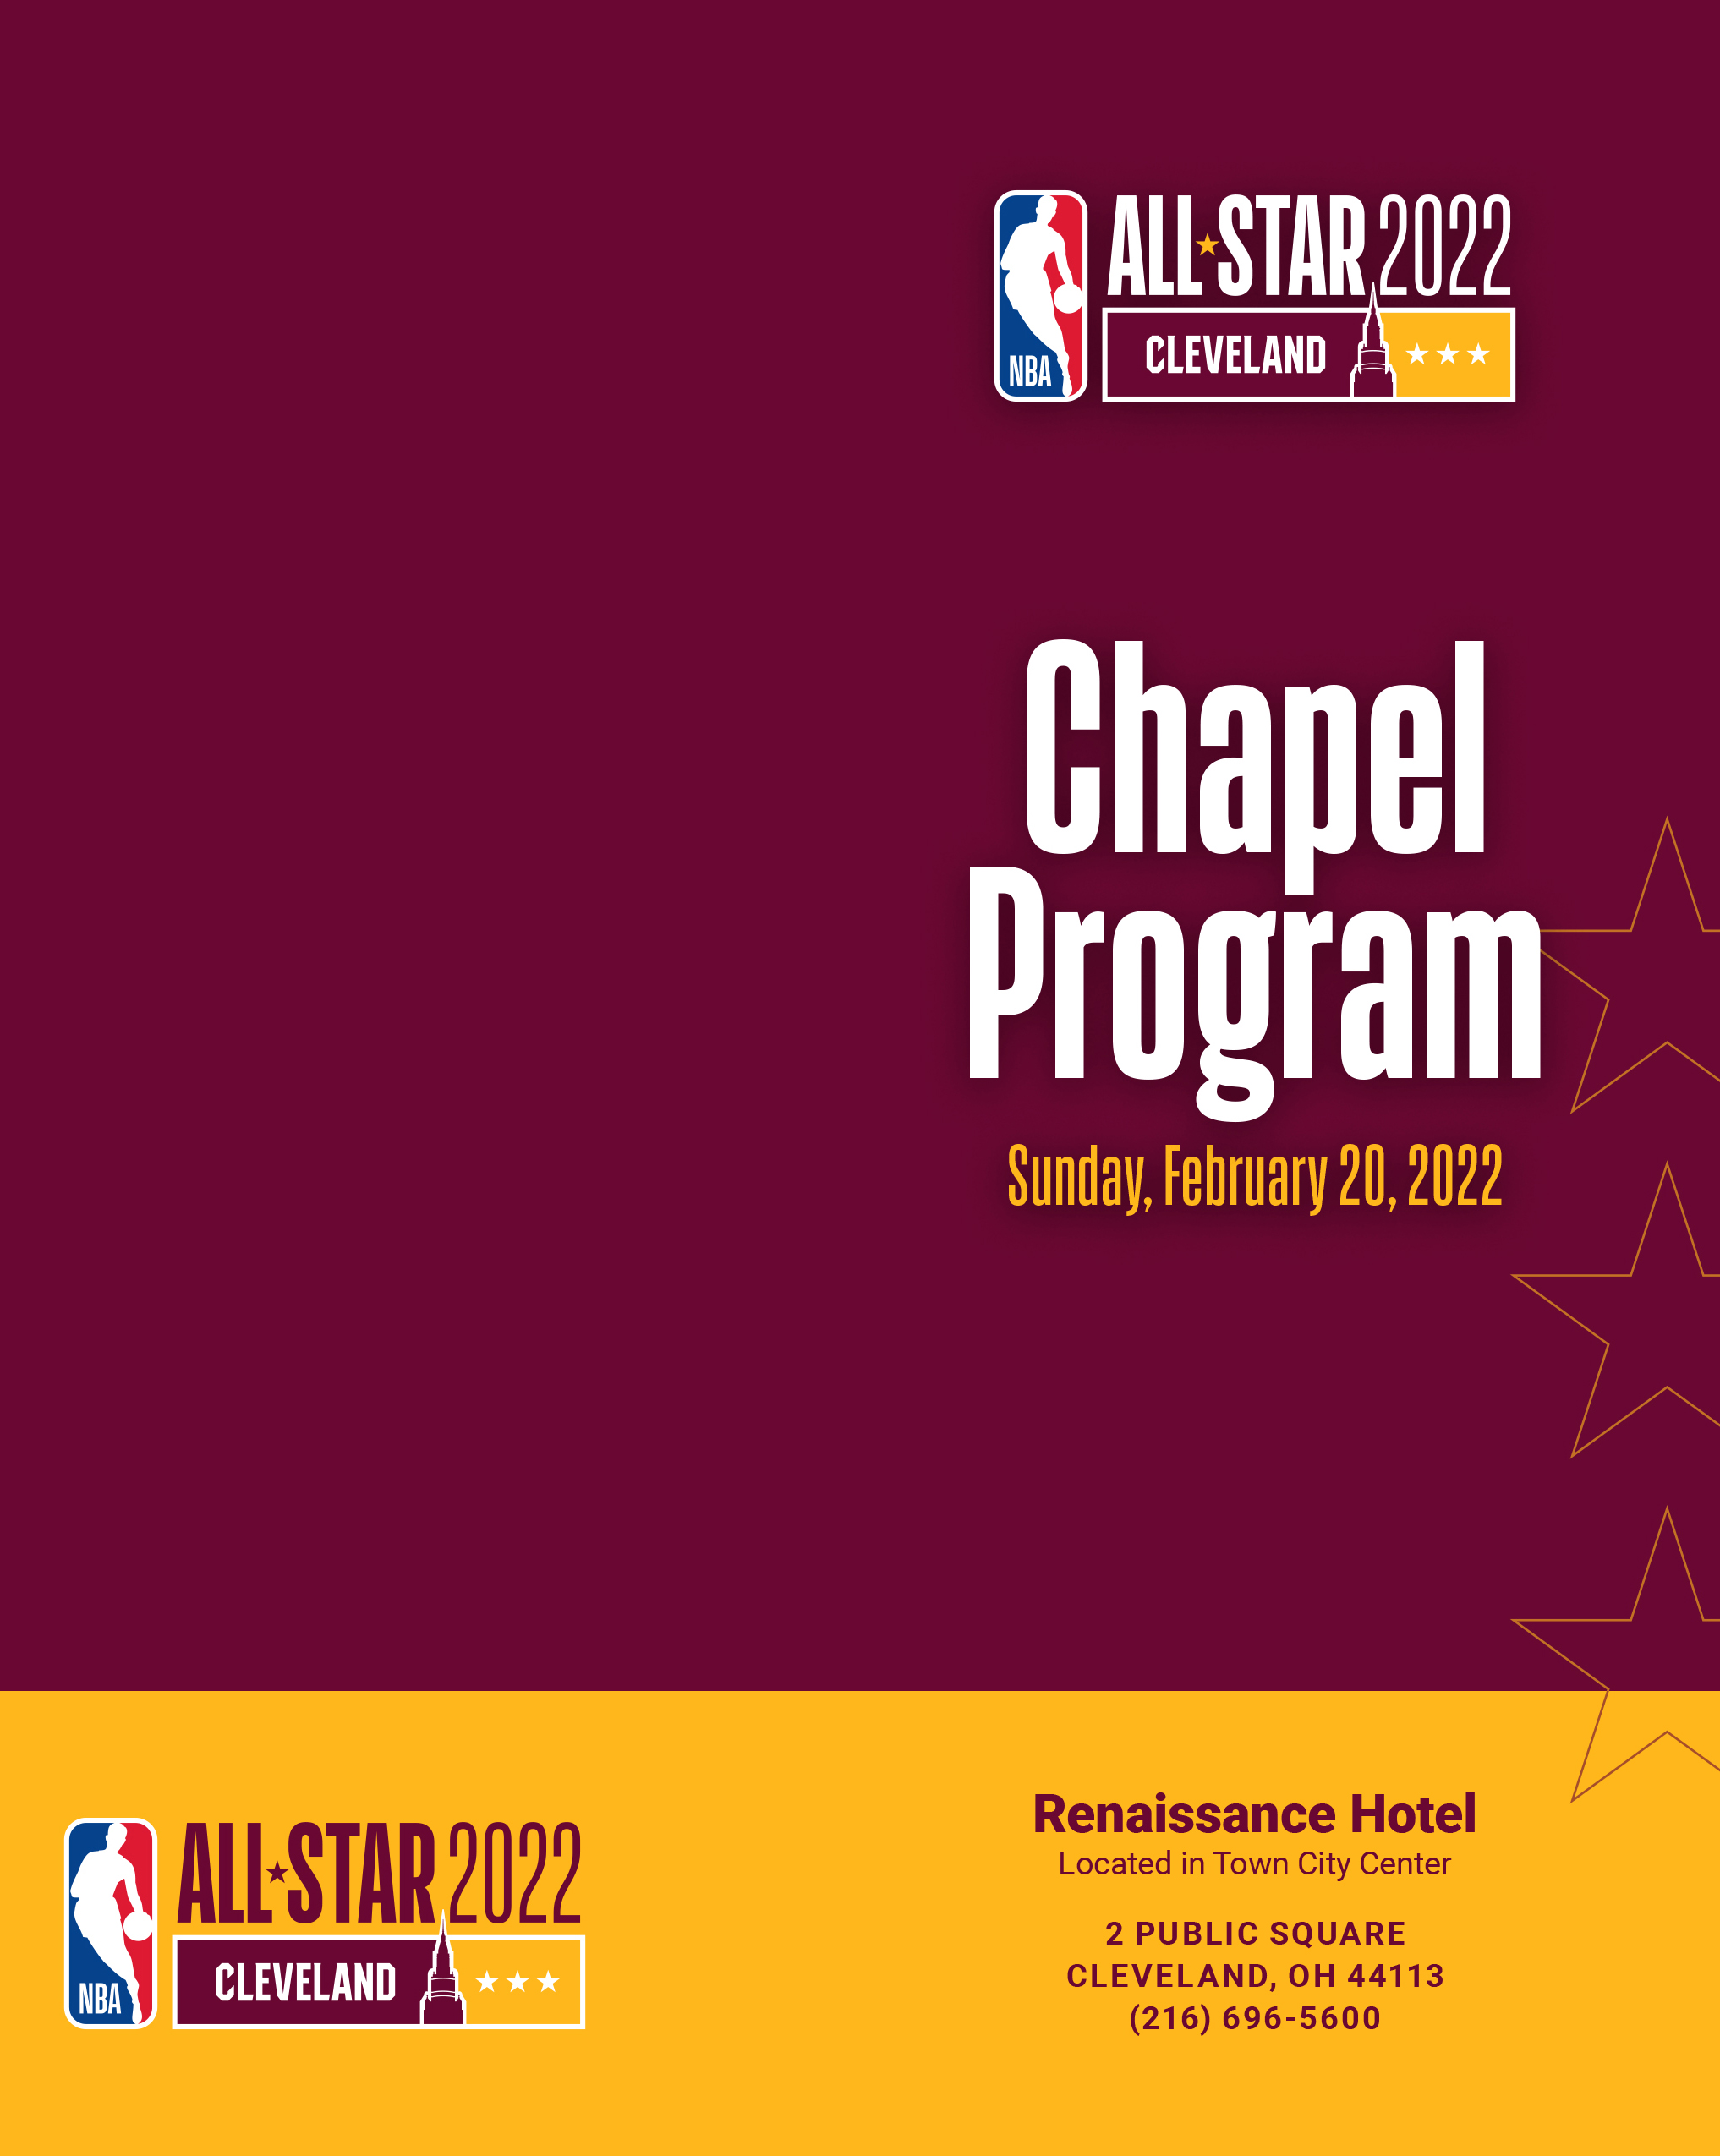 ASW CEO Andre Thornton Featured Speaker At NBA All-Star Chapel Program